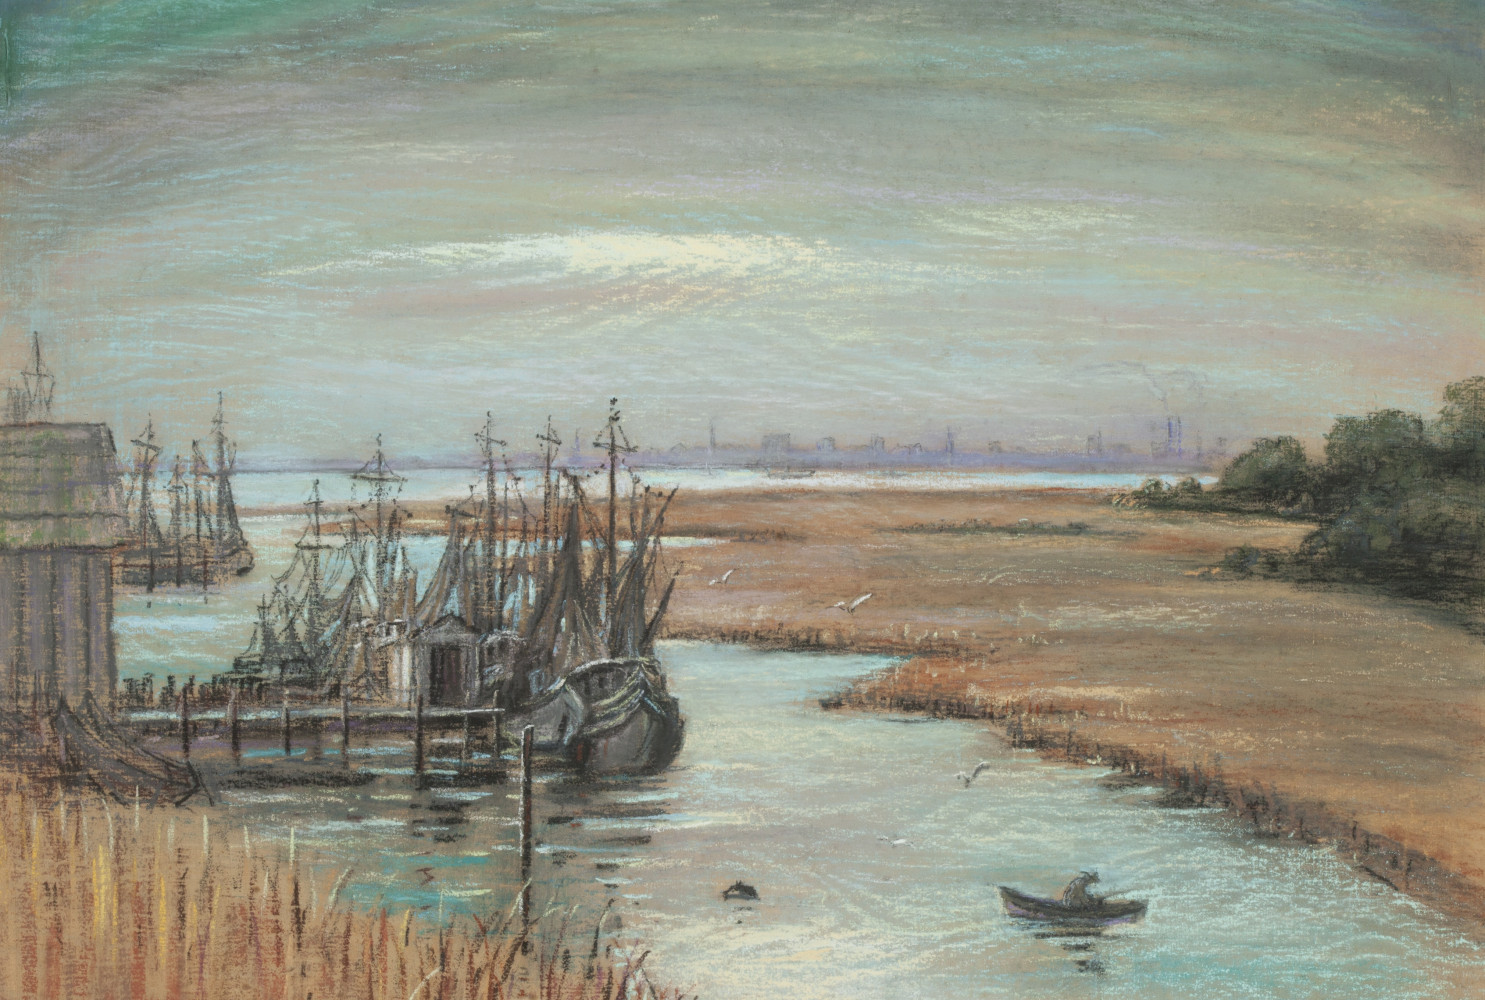 Shem Creek, 1954, By Elizabeth O'Neill Verner (American, 1883 - 1979); Pastel on silk glued to plywood; 22 5/8 x 27 1/2 inches; 2007.11.01; The Johnson Collection, Spartanburg, South Carolina